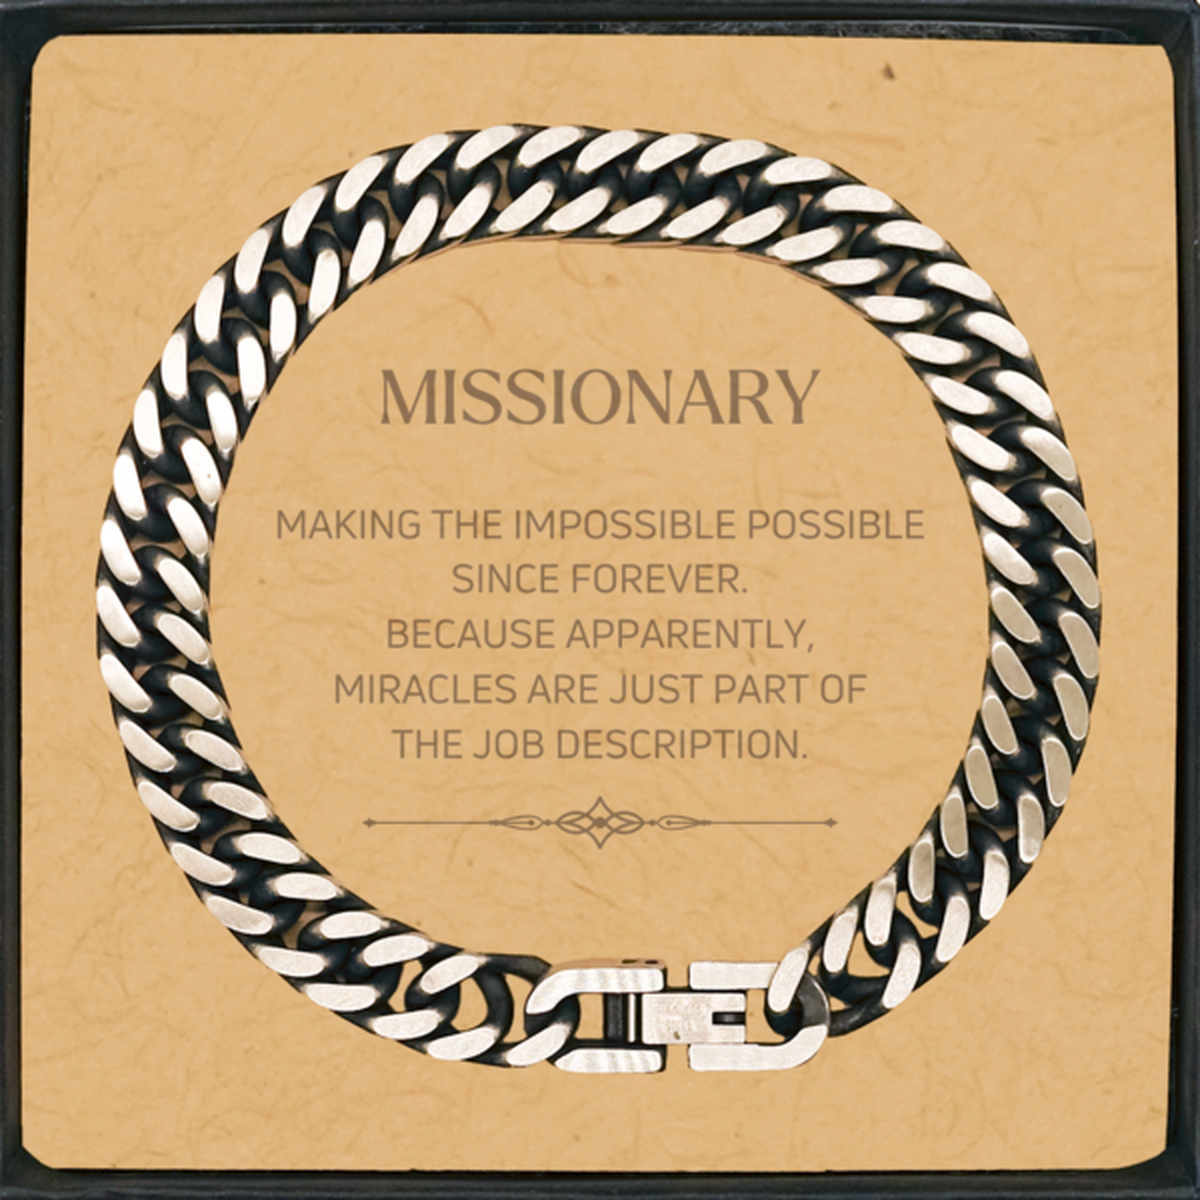 Funny Missionary Gifts, Miracles are just part of the job description, Inspirational Birthday Cuban Link Chain Bracelet For Missionary, Men, Women, Coworkers, Friends, Boss